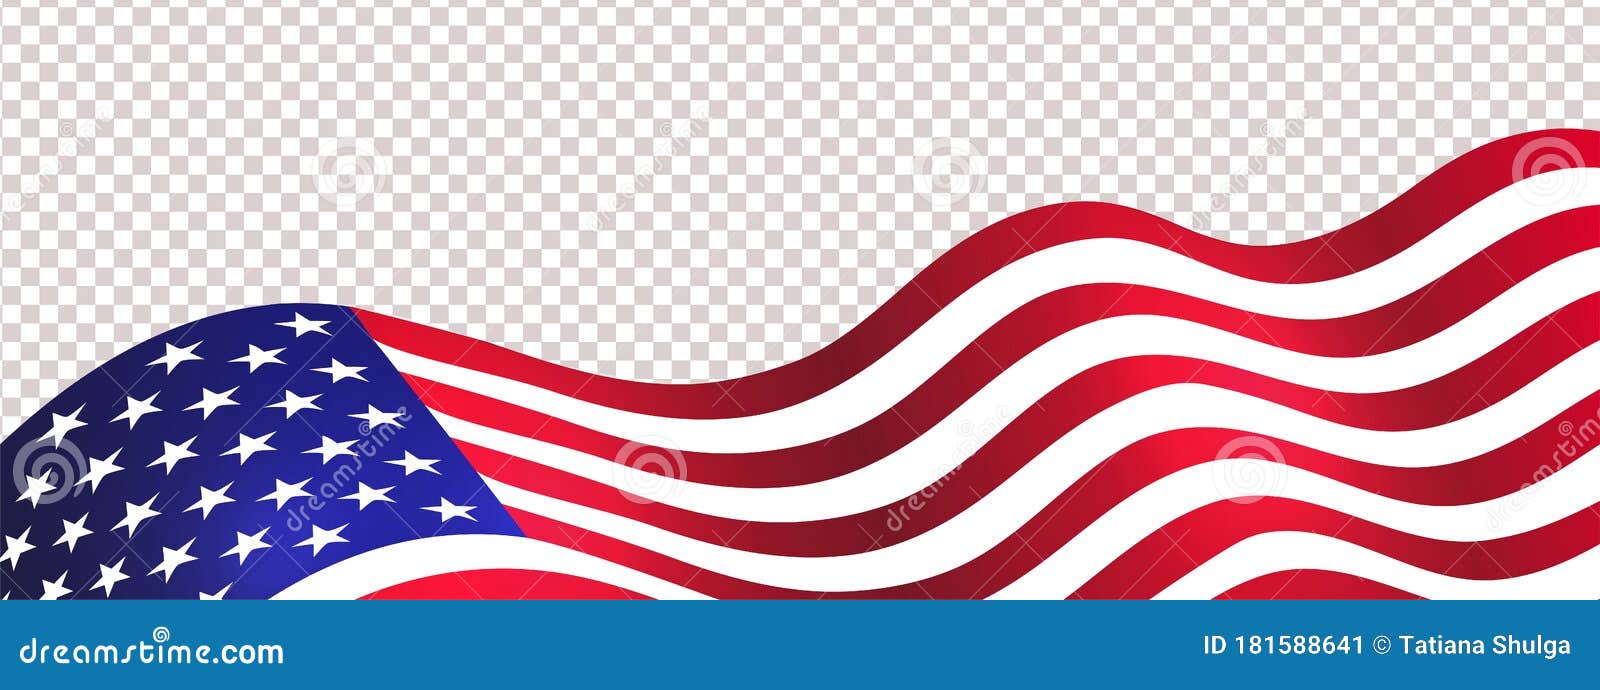 4th of july usa independence day. waving american flag  on transparent background